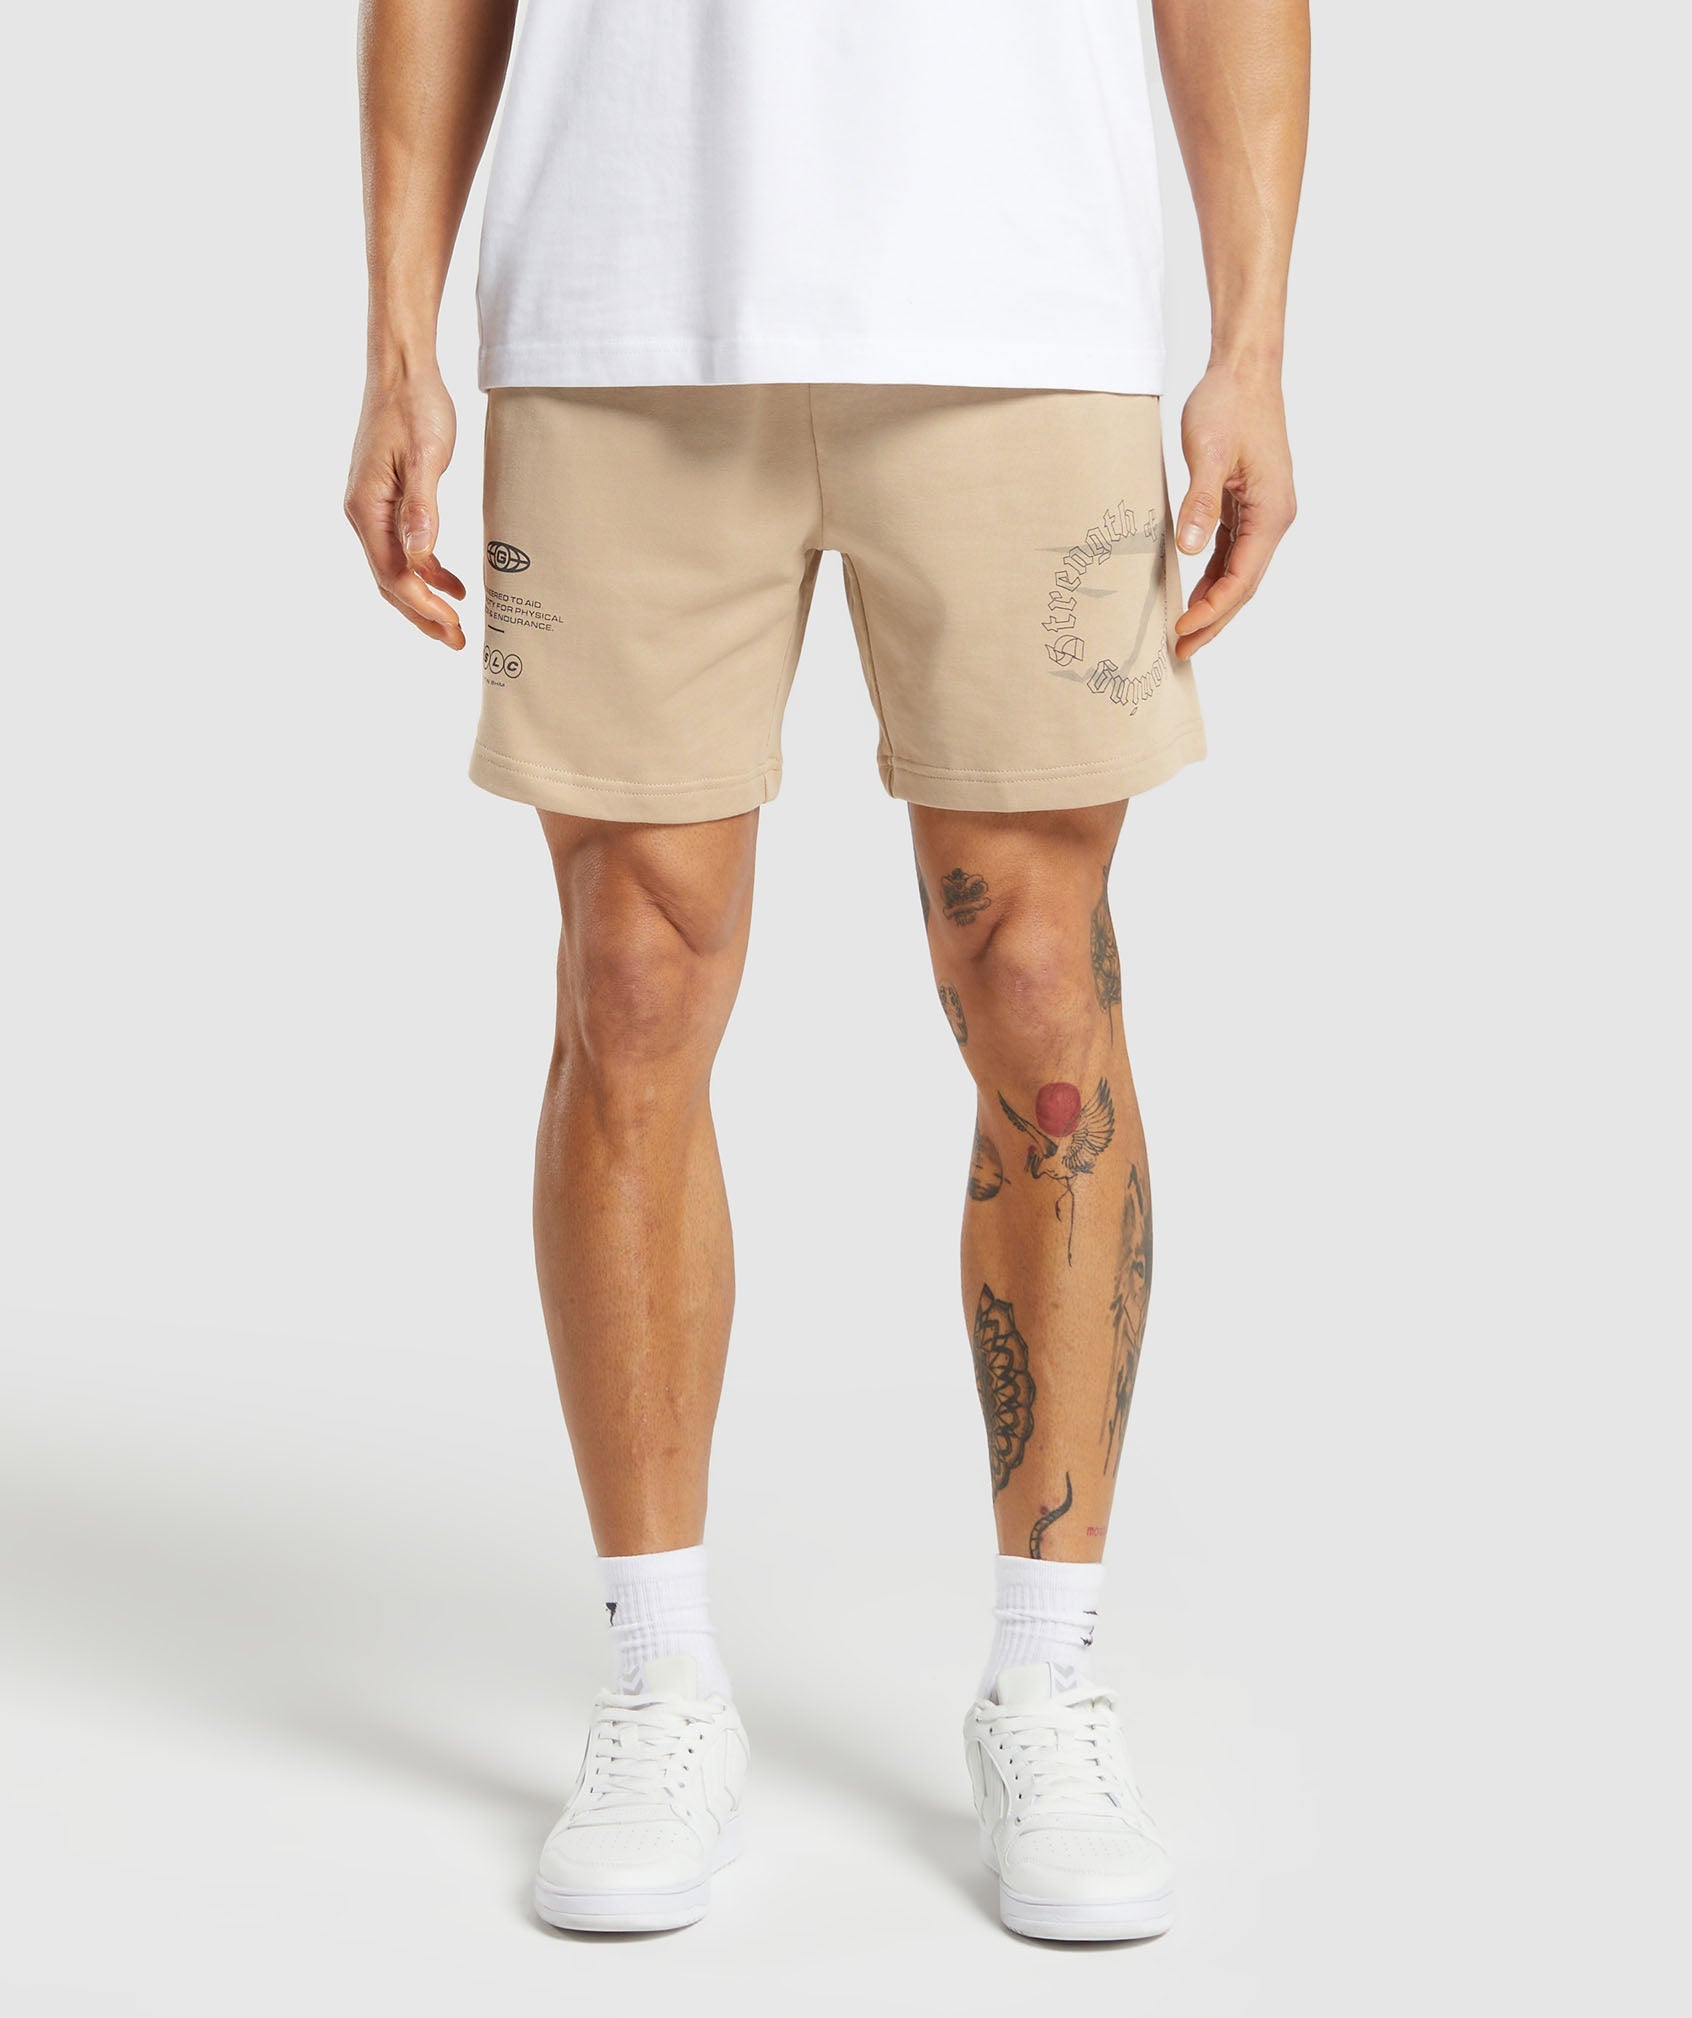 Strength and Conditioning 7" Shorts in Vanilla Beige